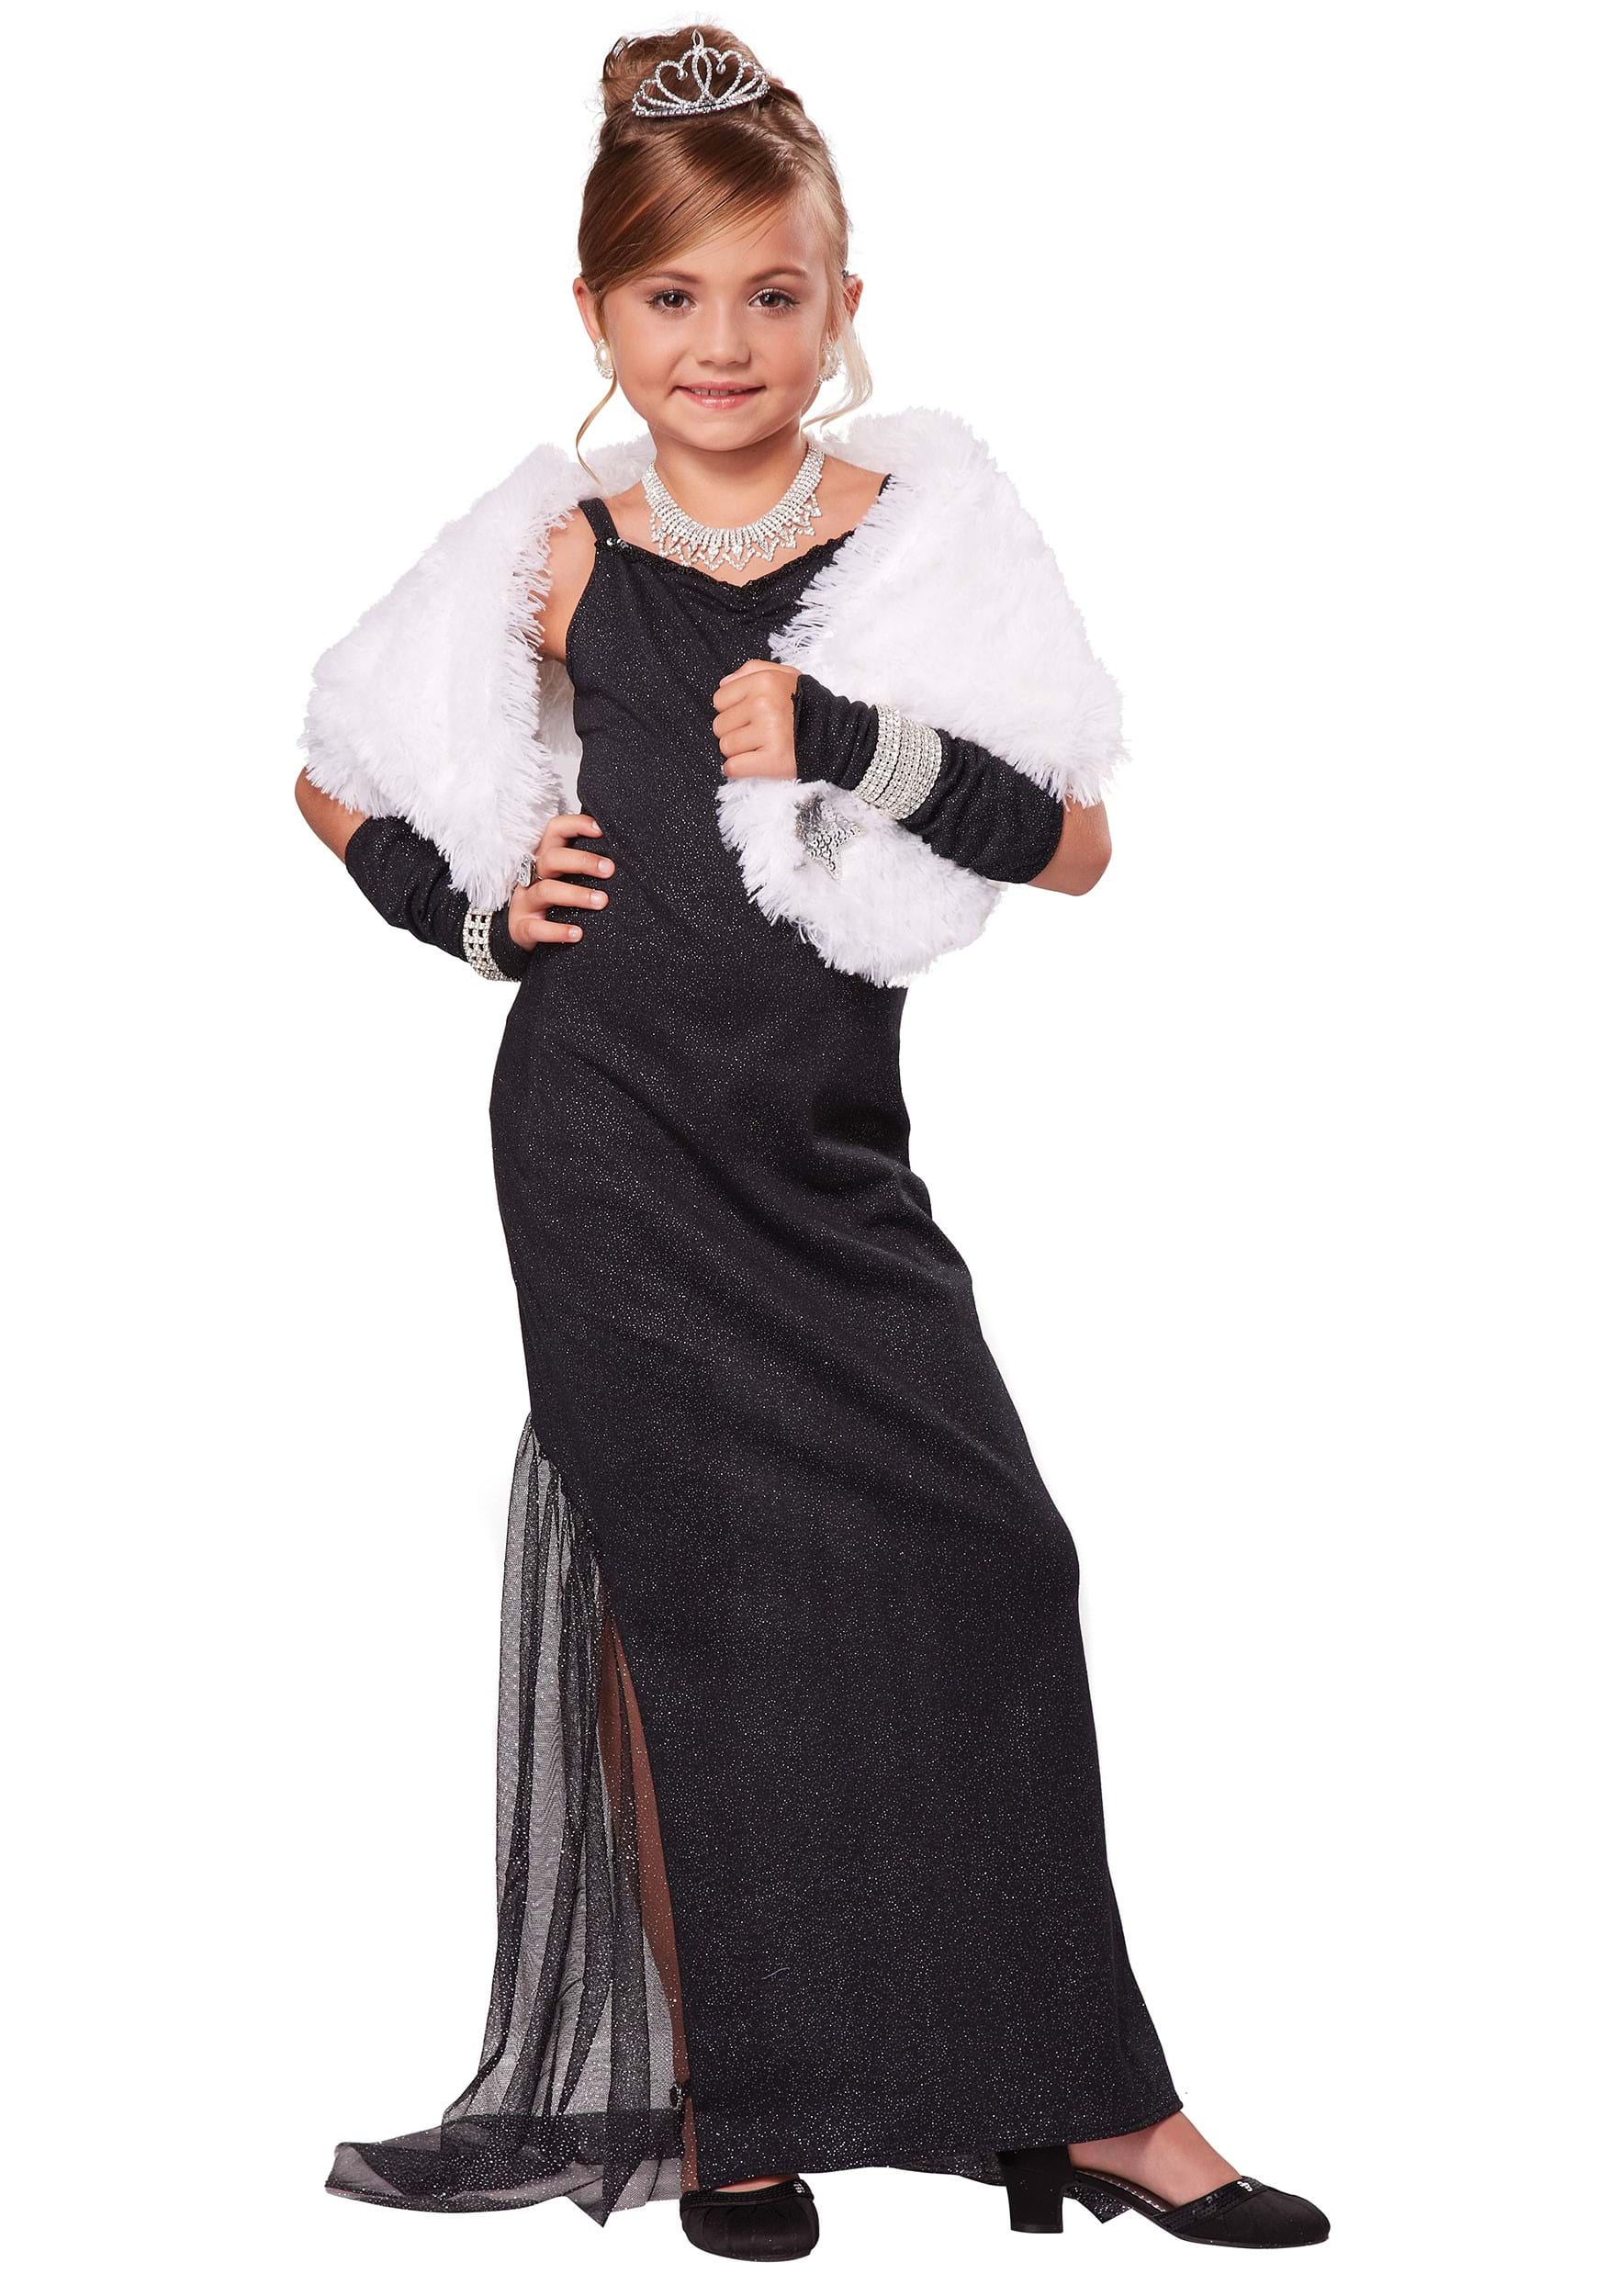 Photos - Fancy Dress California Costume Collection Hollywood Diva Girl's Costume Black/Gray 